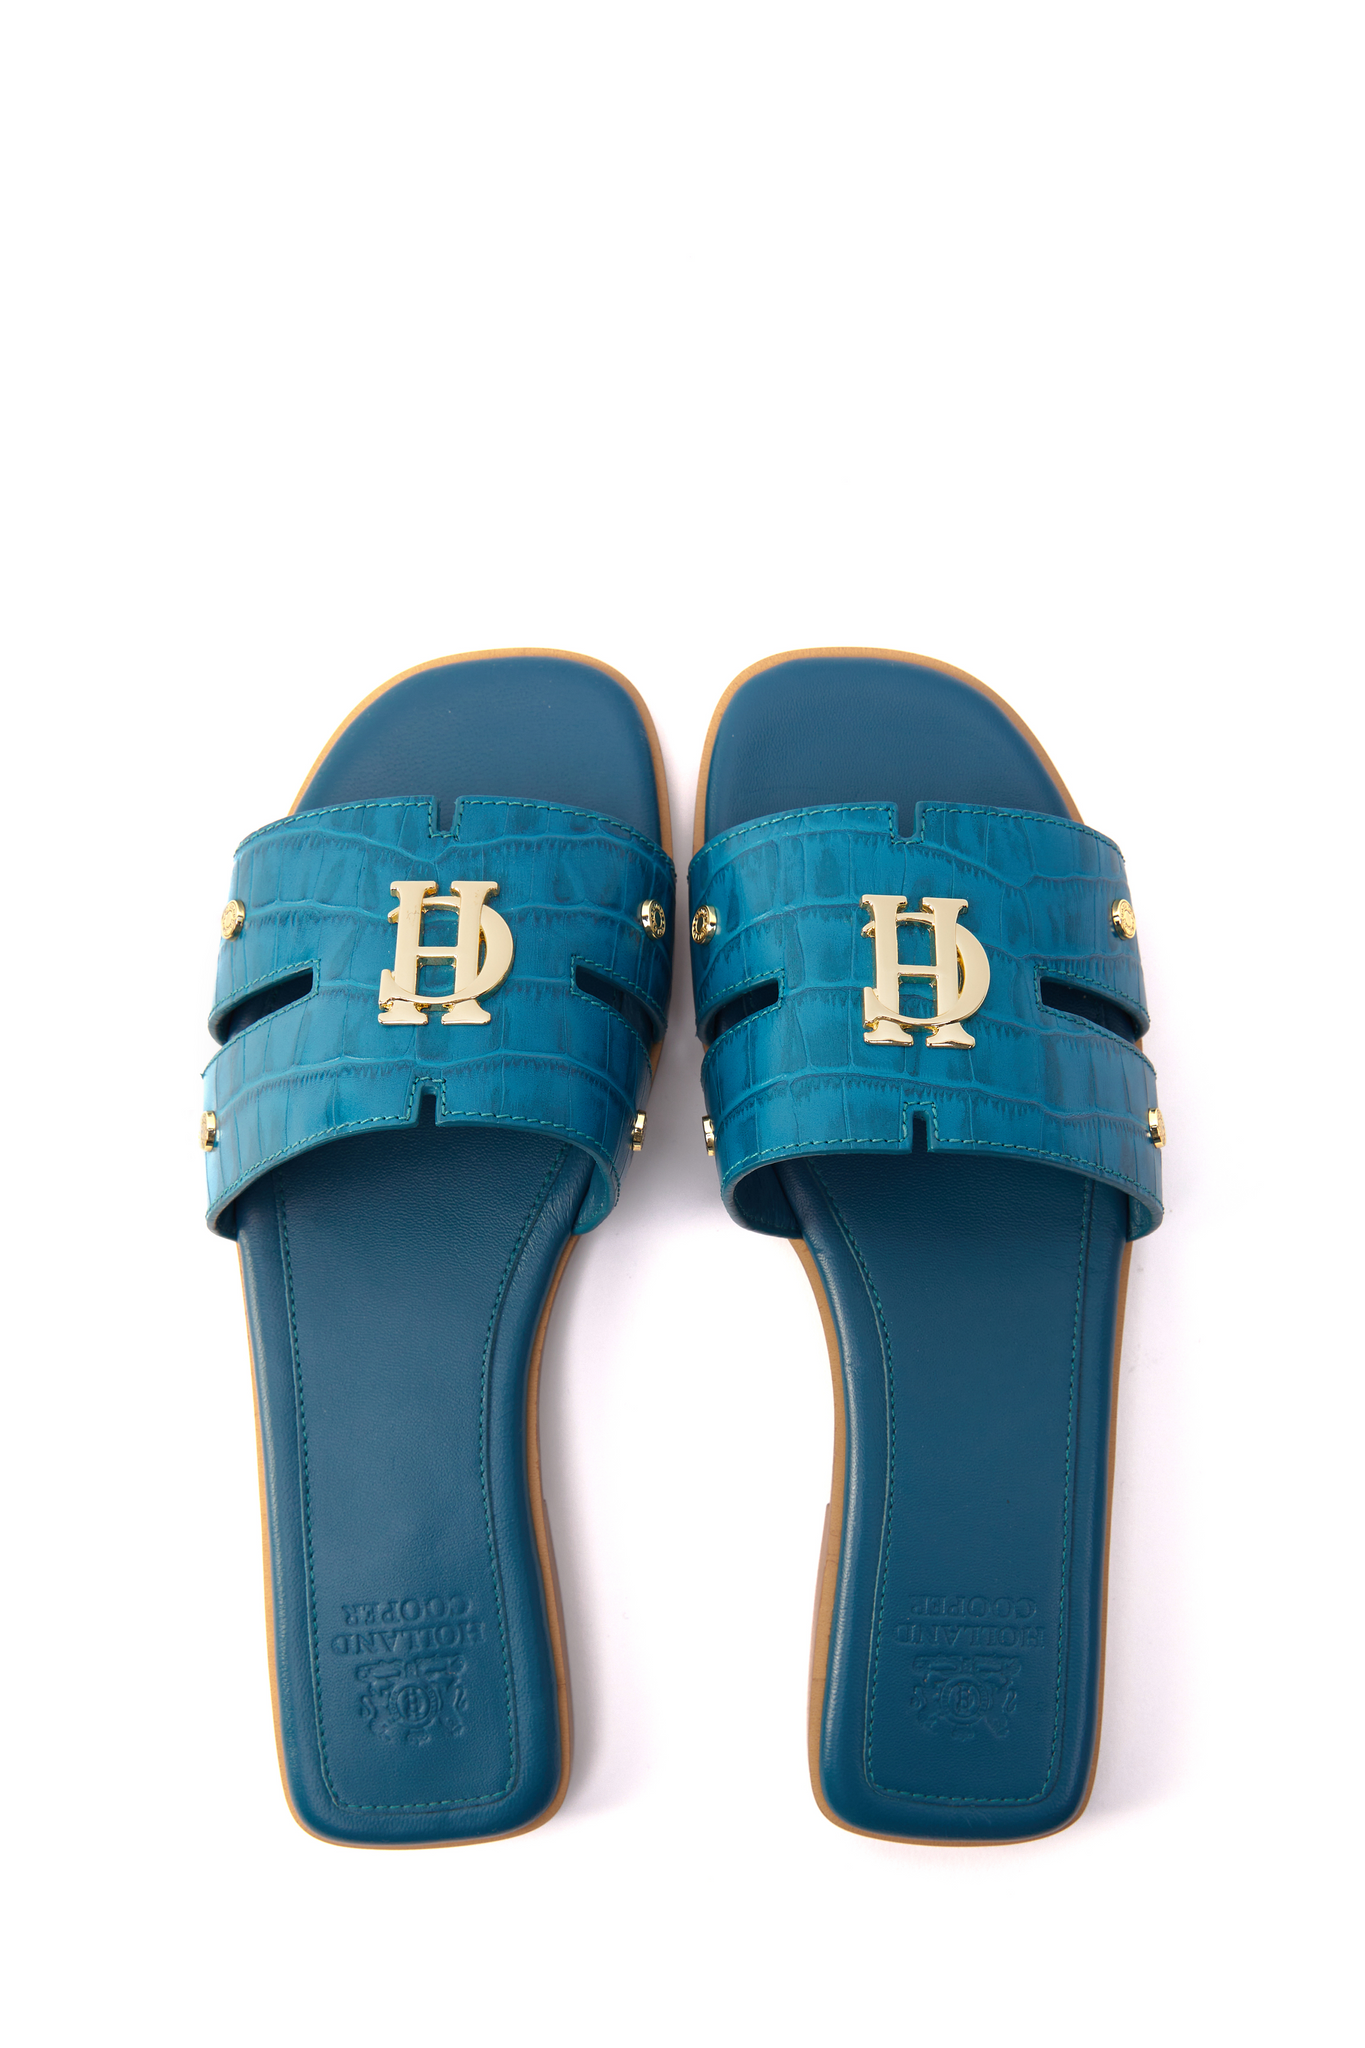 Birds eye view of Teal blue croc embossed leather sliders with  a tan leather sole and gold hardware.